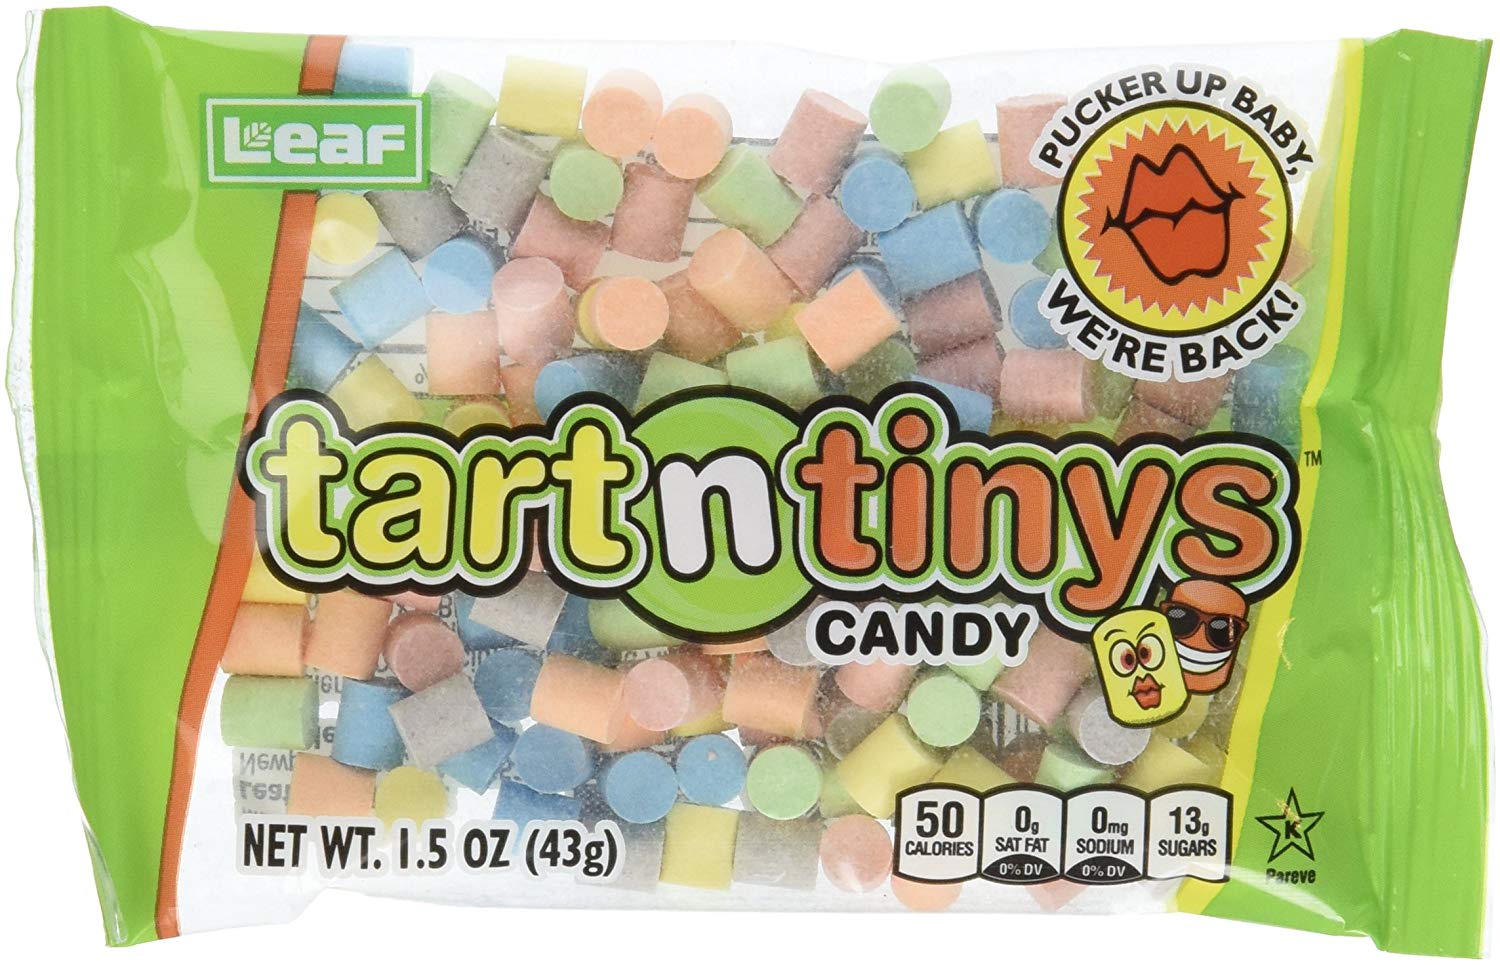 These were a special treat available around easter and halloween